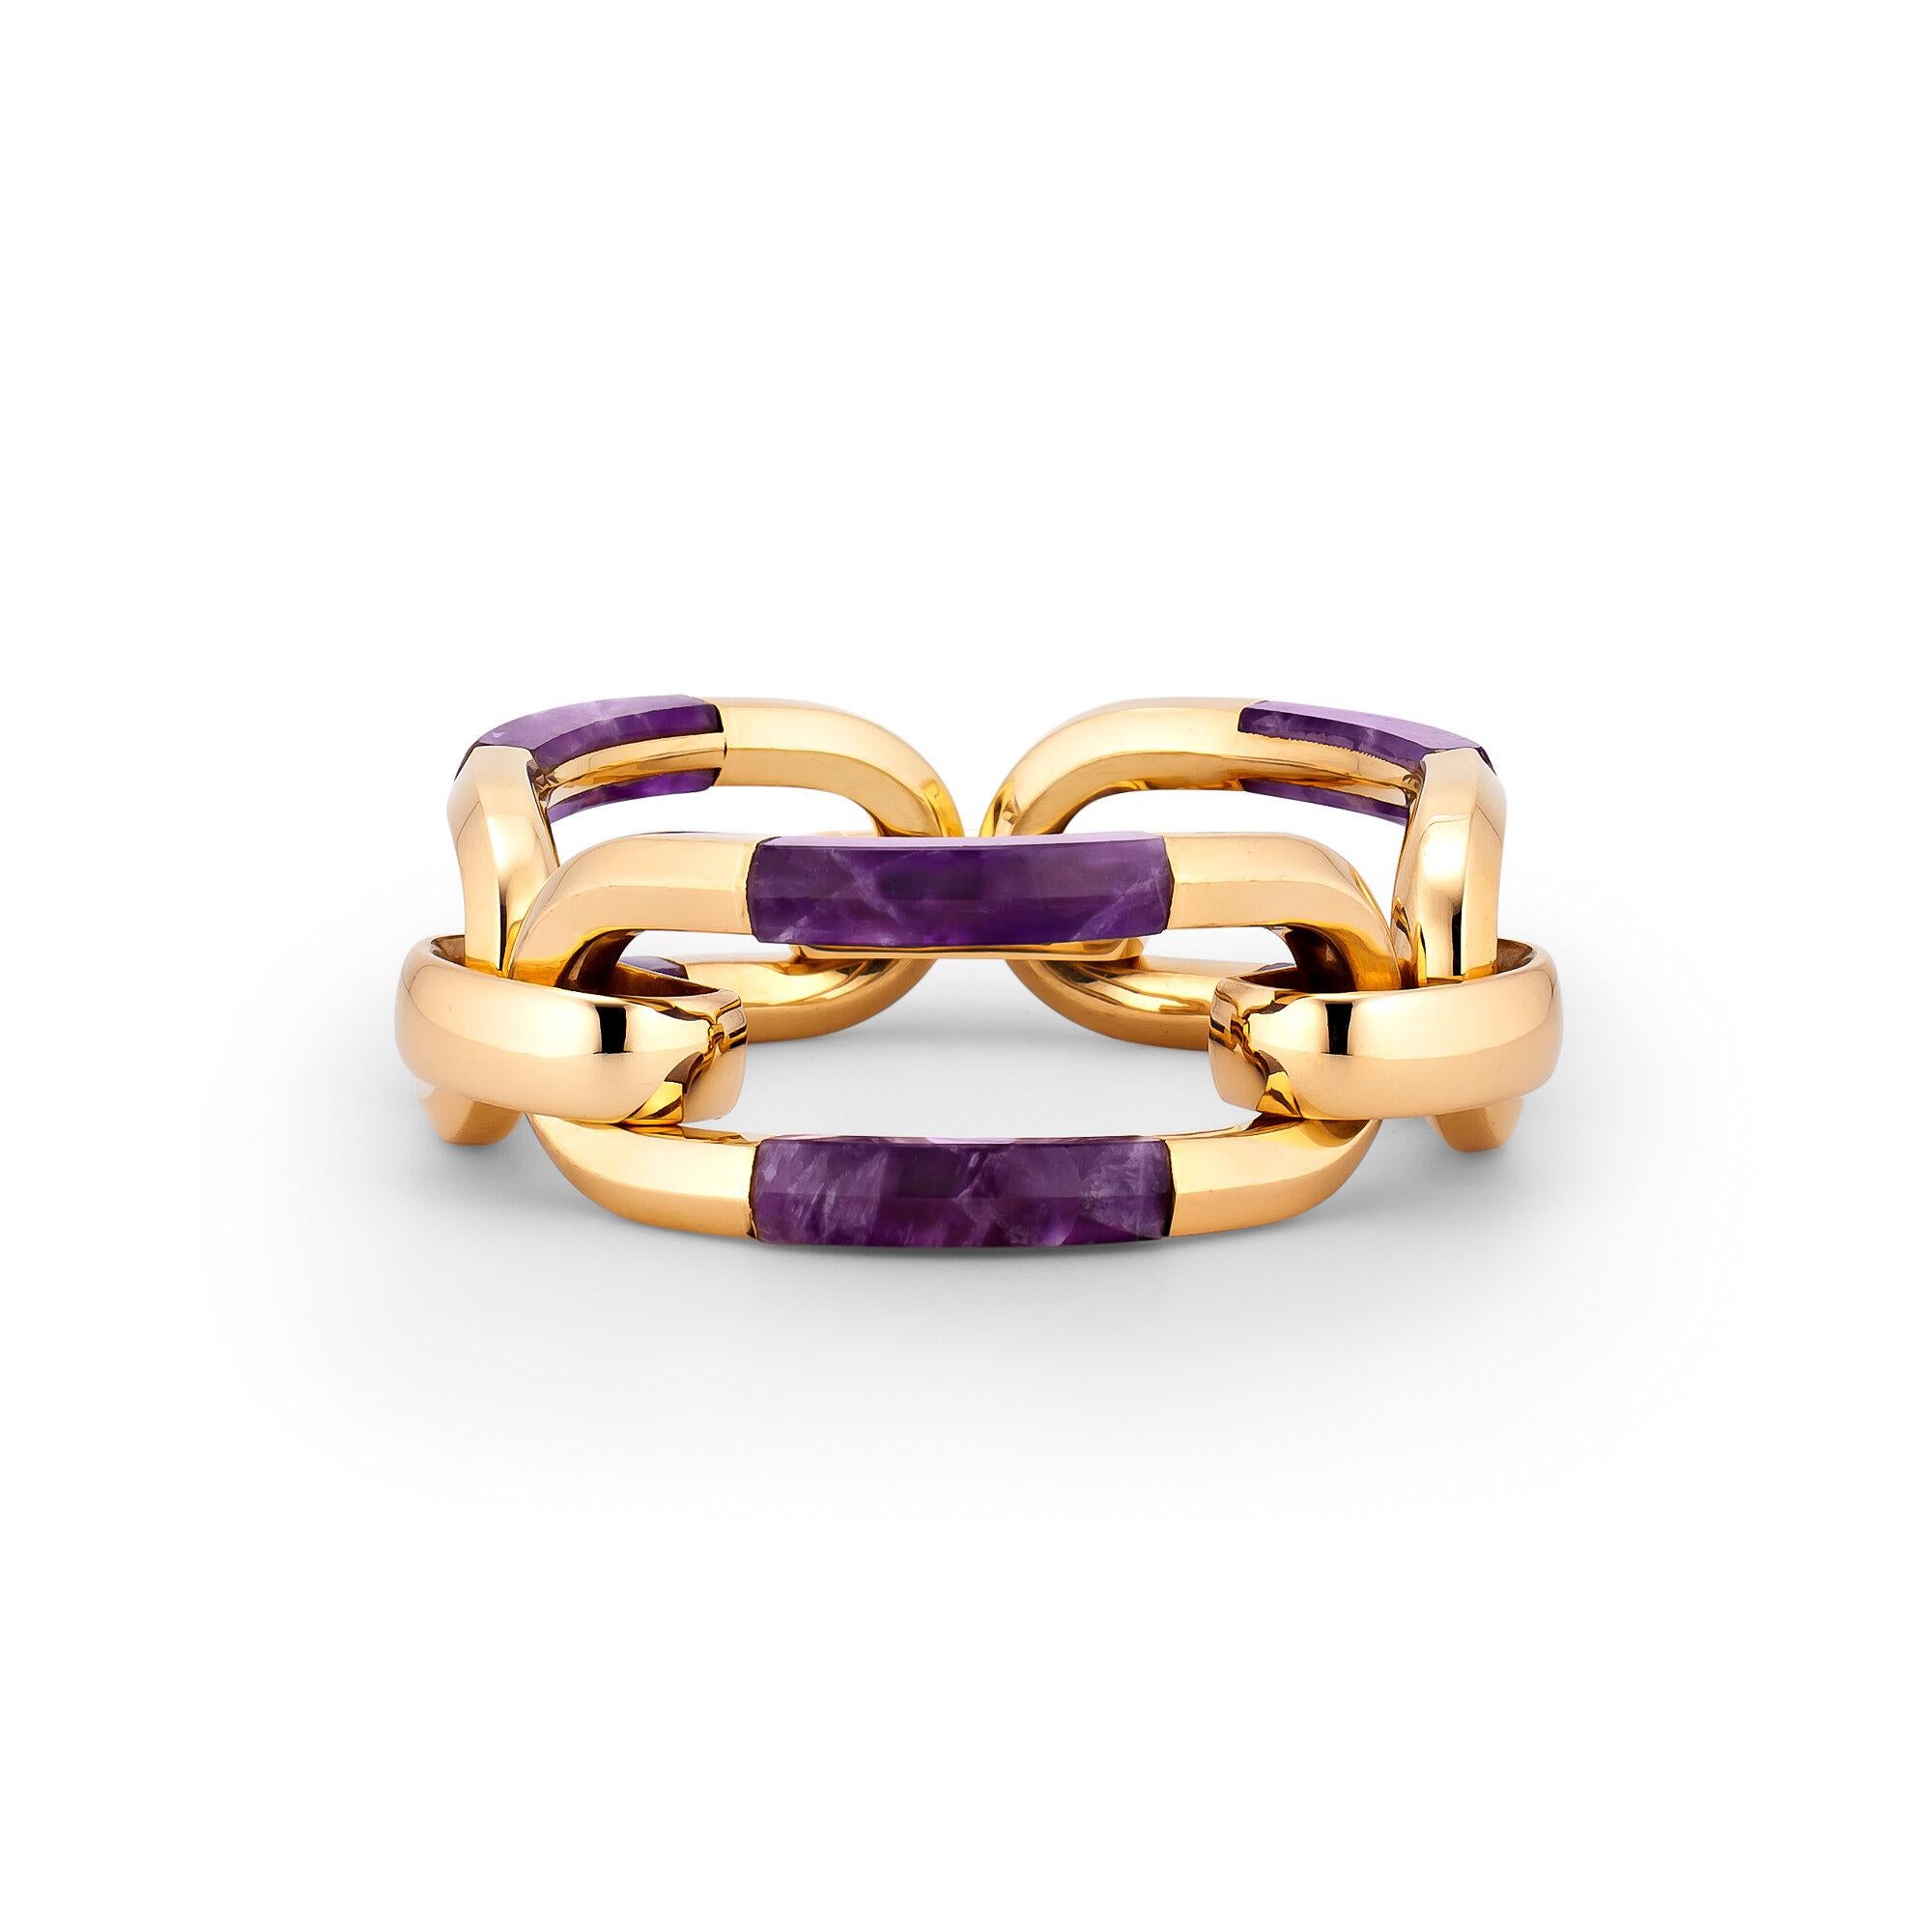 The magnificent purple stone Sugilite is classified as a rare gem. It is thought to generate positive energy protecting against and overcoming negative emotions and situations.  This Van Cleef & Arpels vintage statement bracelet,  with six deep